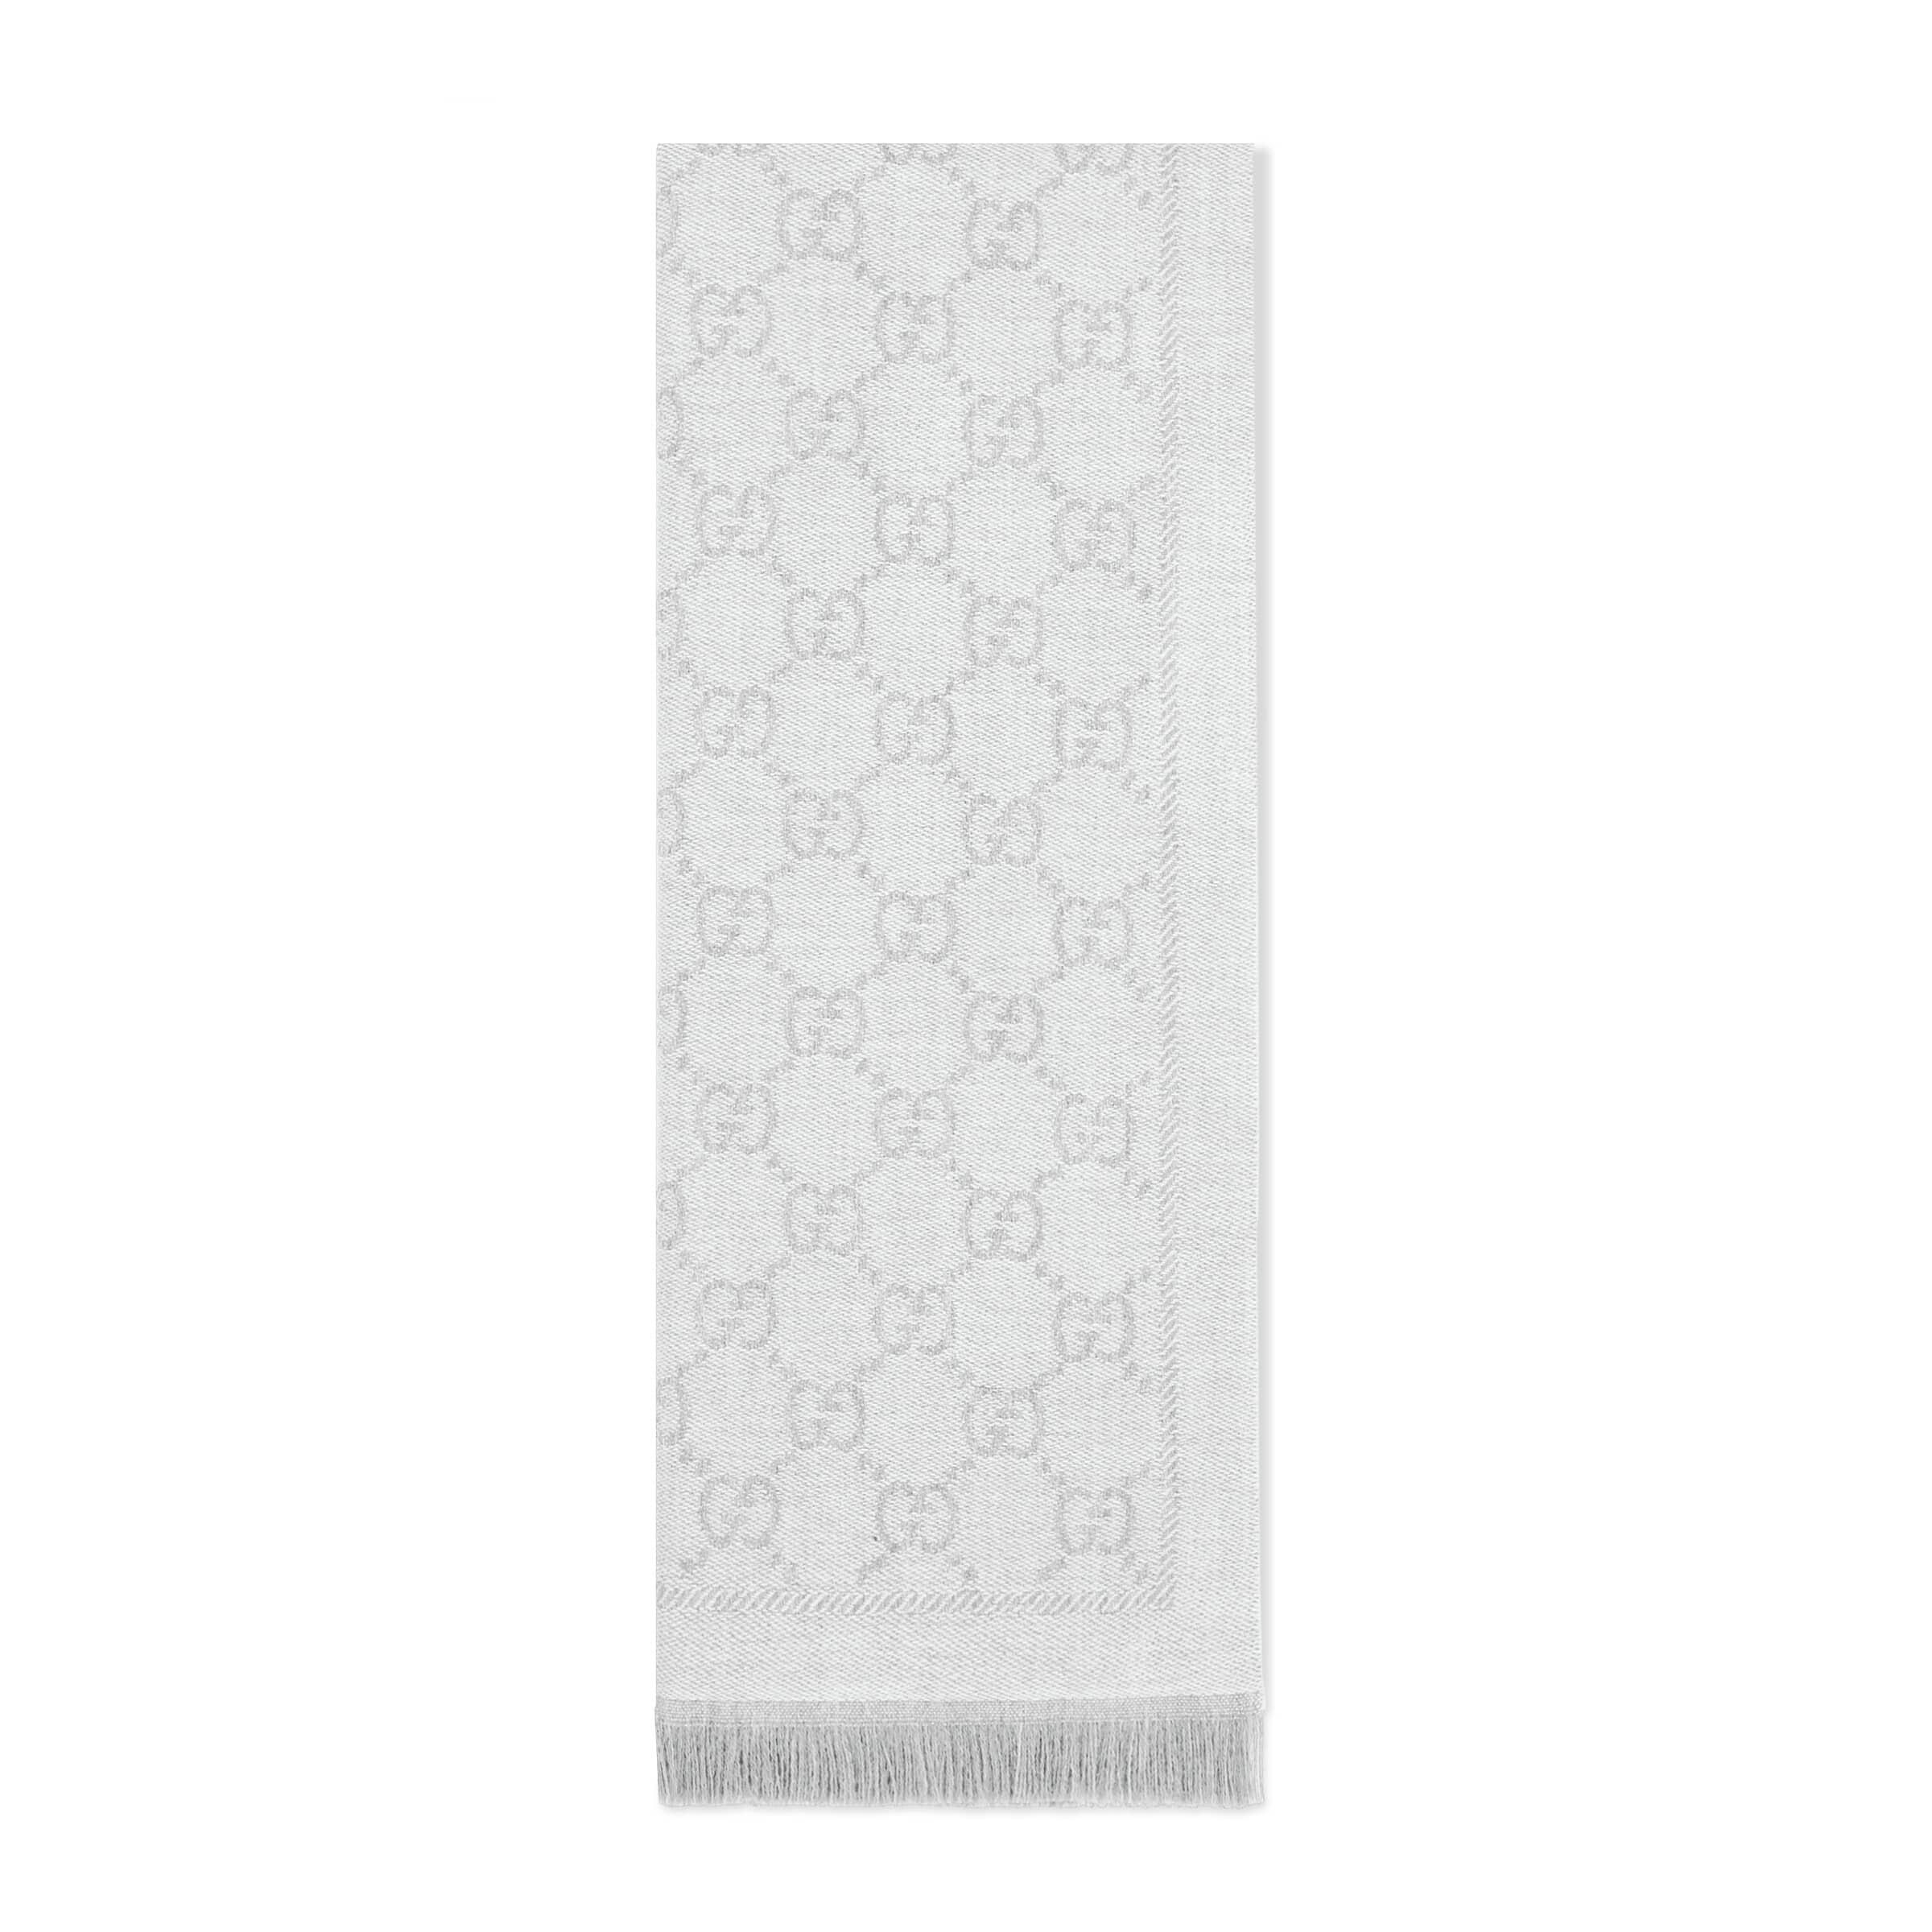 Gucci Gg Jacquard Knit Scarf in Gray | Lyst